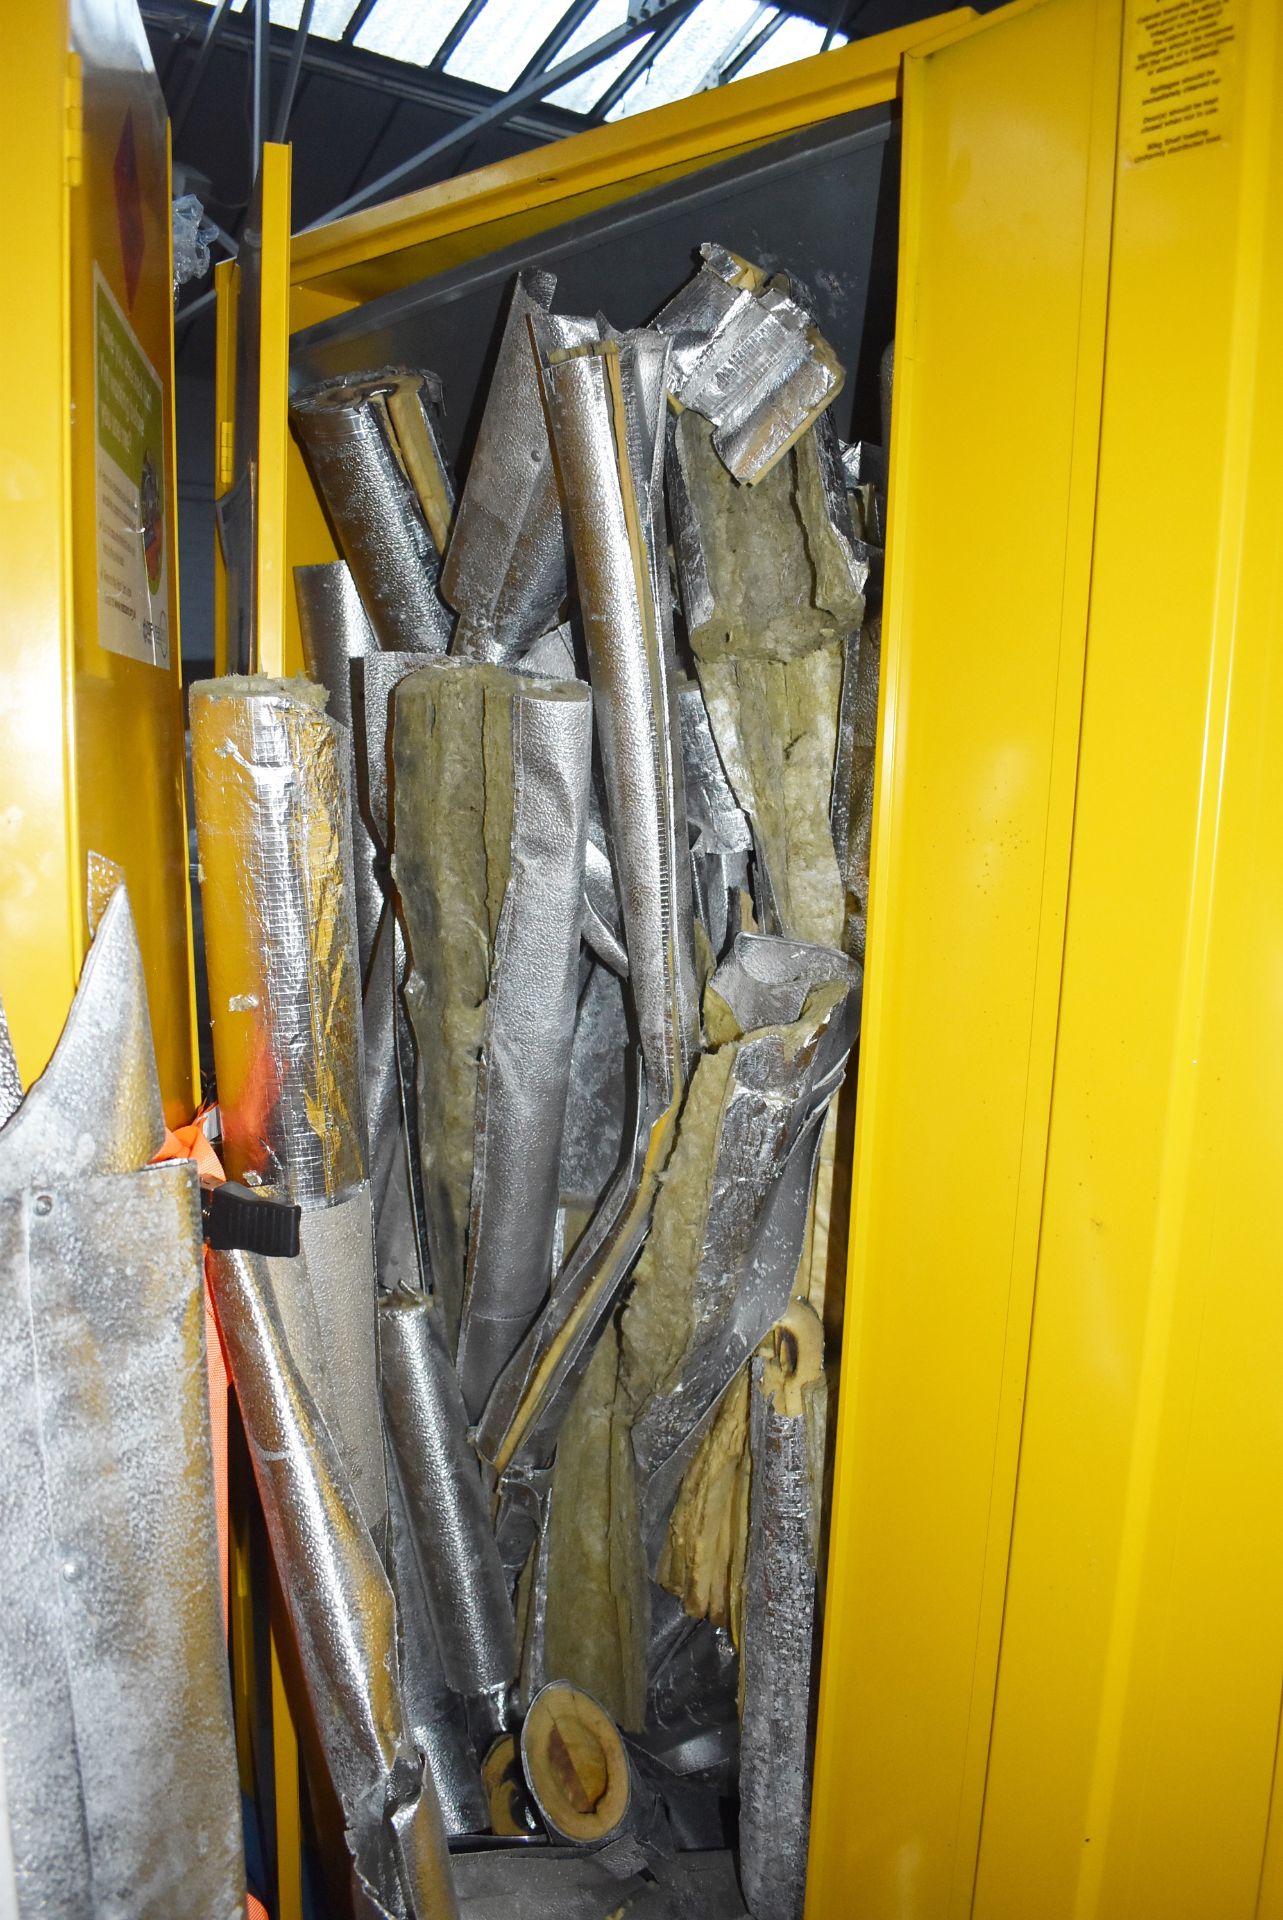 Large Quantity of Thermal Pipe Covering Contents of Two Upright Cabinets - Cabinets Not Included - - Image 7 of 10